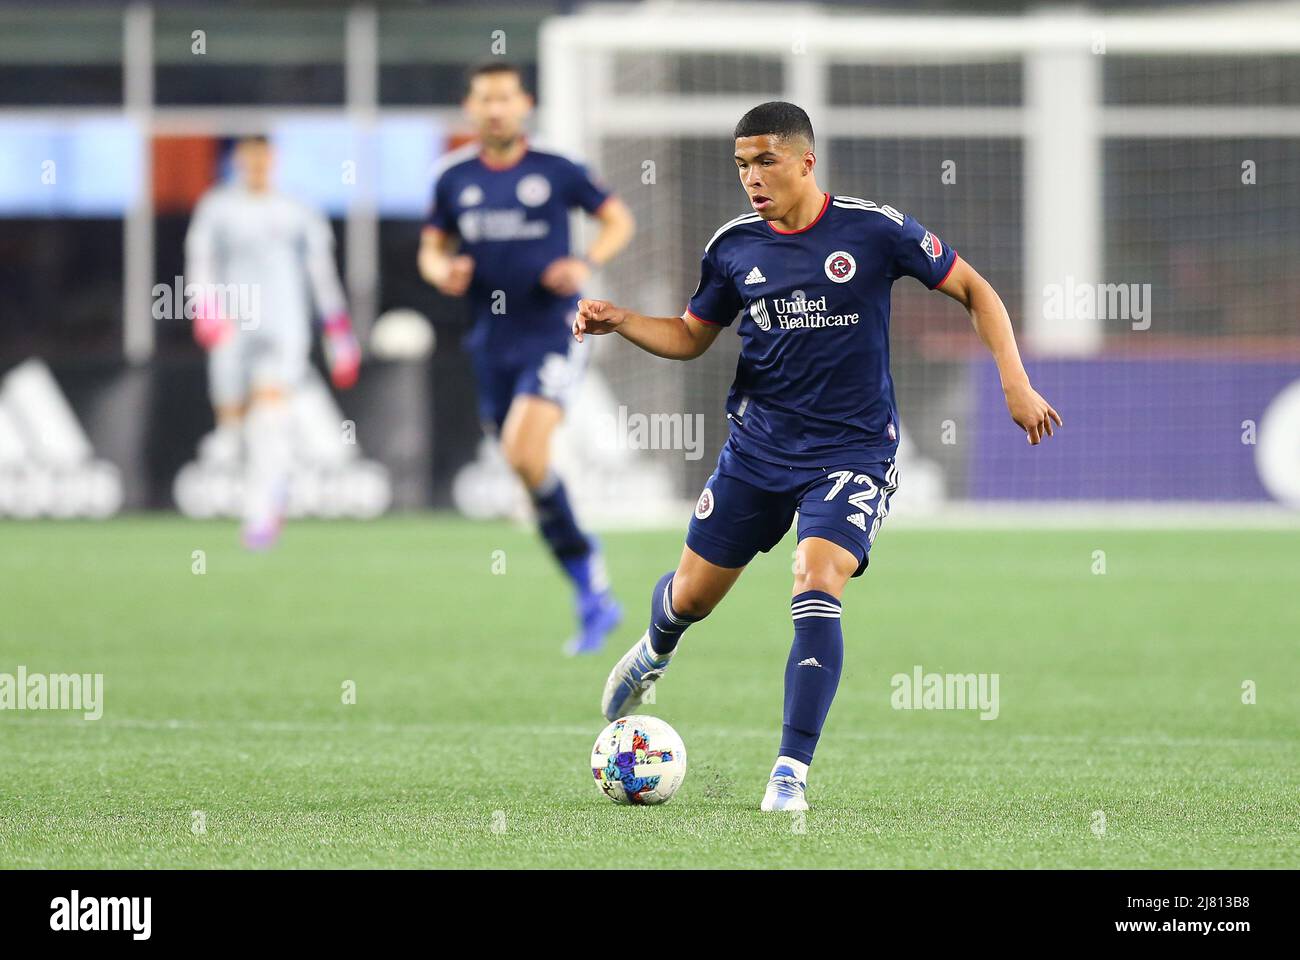 MA, US,11th May, 2022. USA; New England Revolution midfielder Damian Rivera  (72) in action during an MLS U.S. Open Cup match between FC Cincinnati and New  England Revolution at Gillette Stadium. Anthony